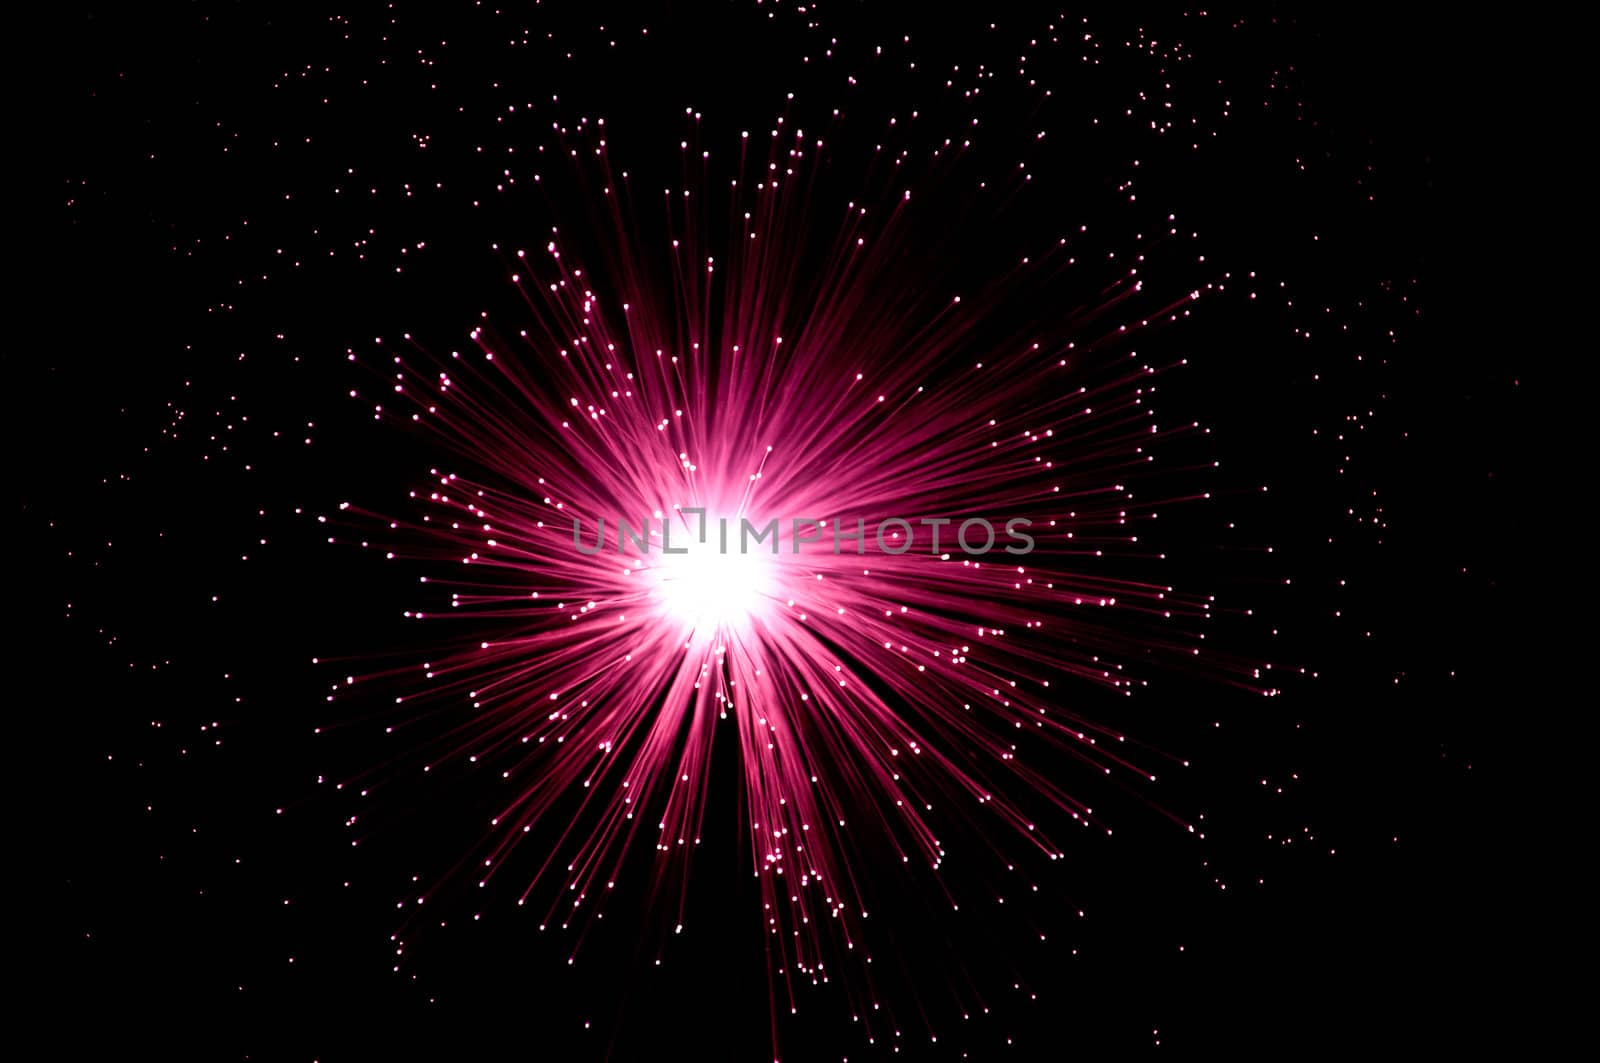 Overhead view capturing an illuminated red fibre optic light display arranged over black.